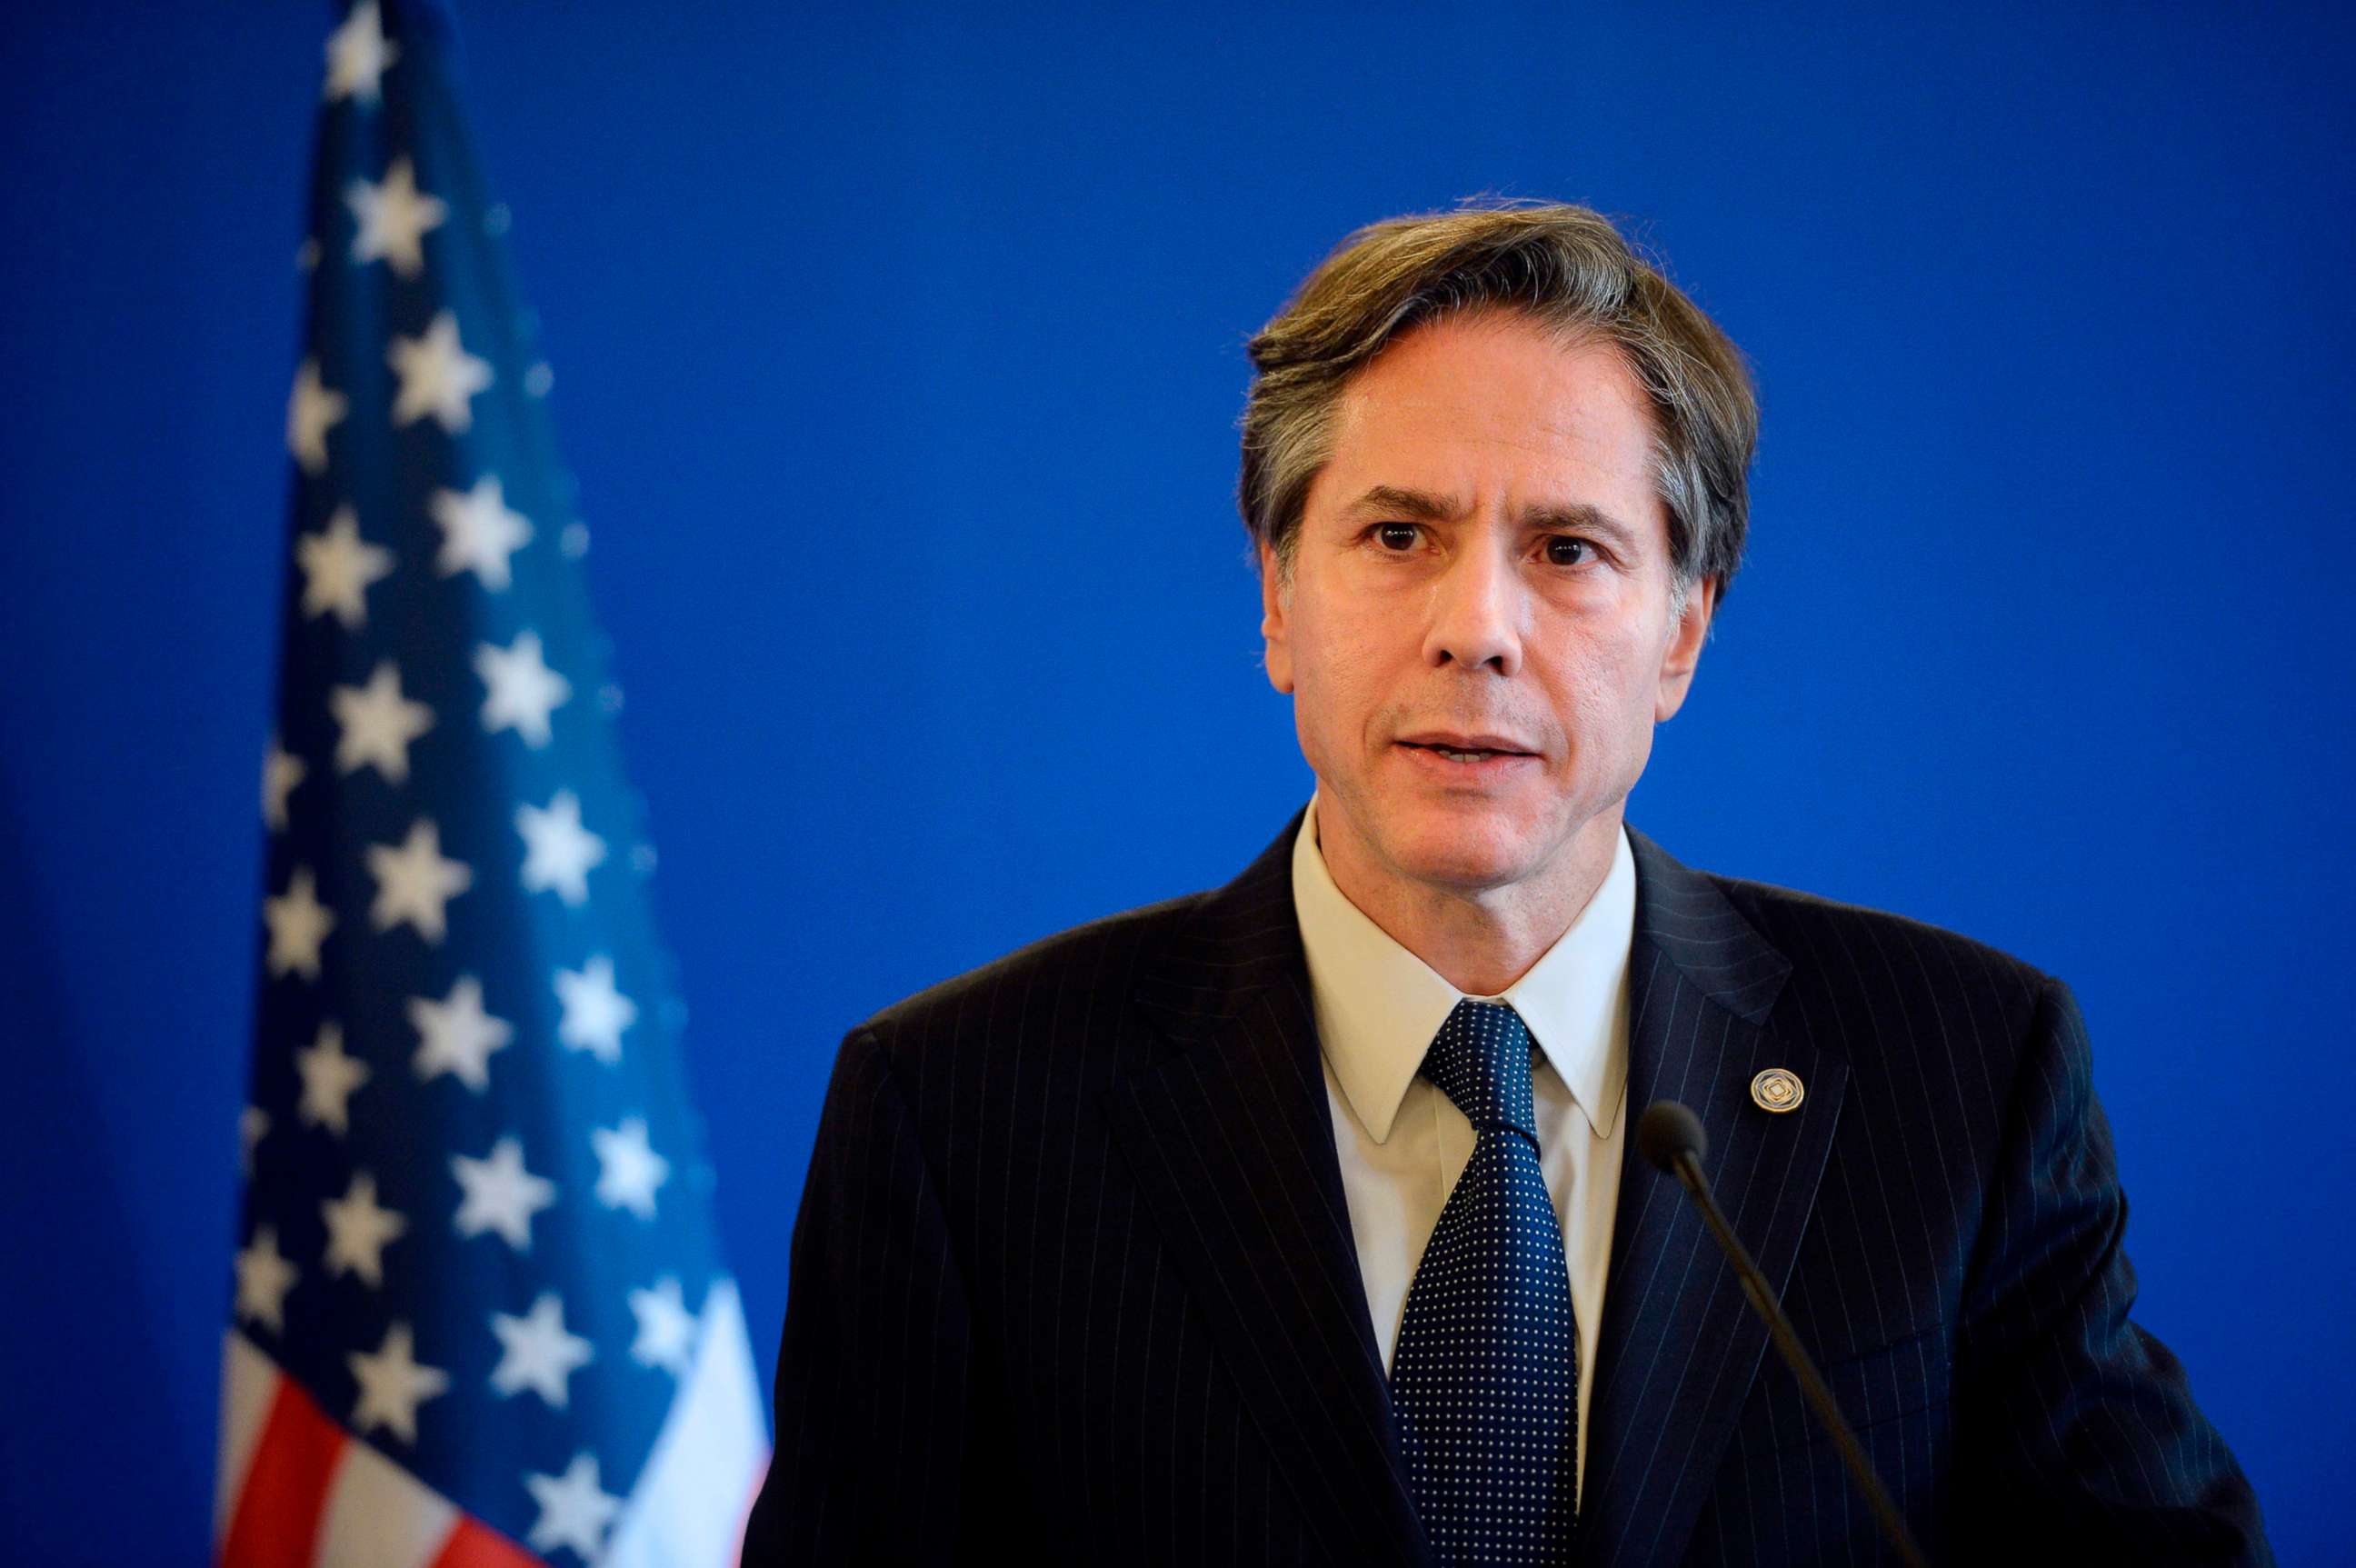 PHOTO: In this June 2, 2015, file photo, former Deputy Secretary of State Antony J Blinken gives a joint press conference following a meeting with Foreign Affairs members of the anti-Islamic State coalition in Paris.